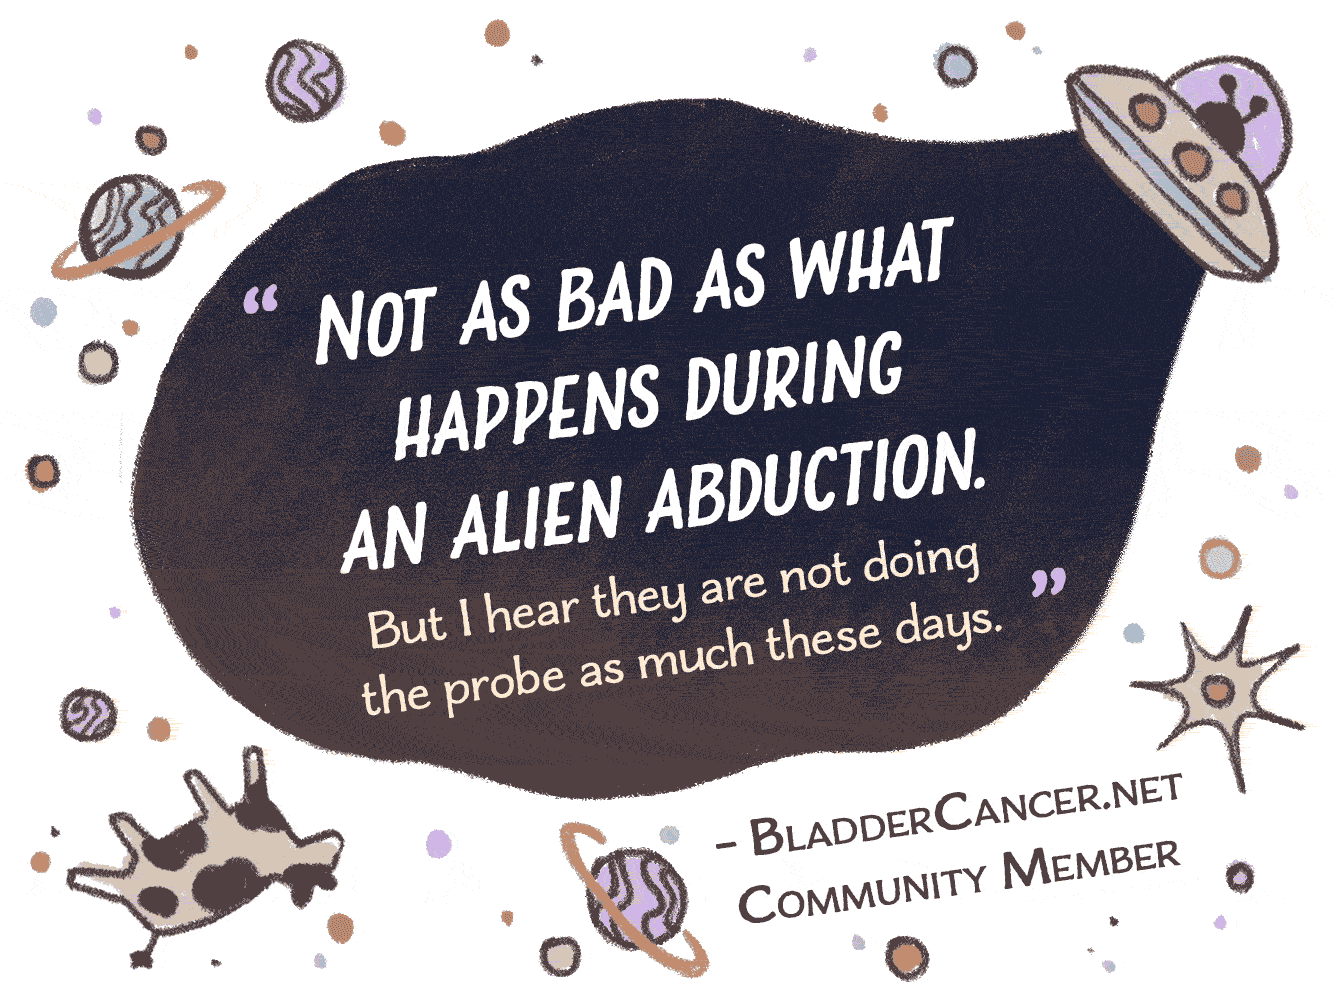 Not as bad as what happens during an alien abduction. But I hear they are not doing the probe as much these days. A quote from a BladderCancer.net Community Member